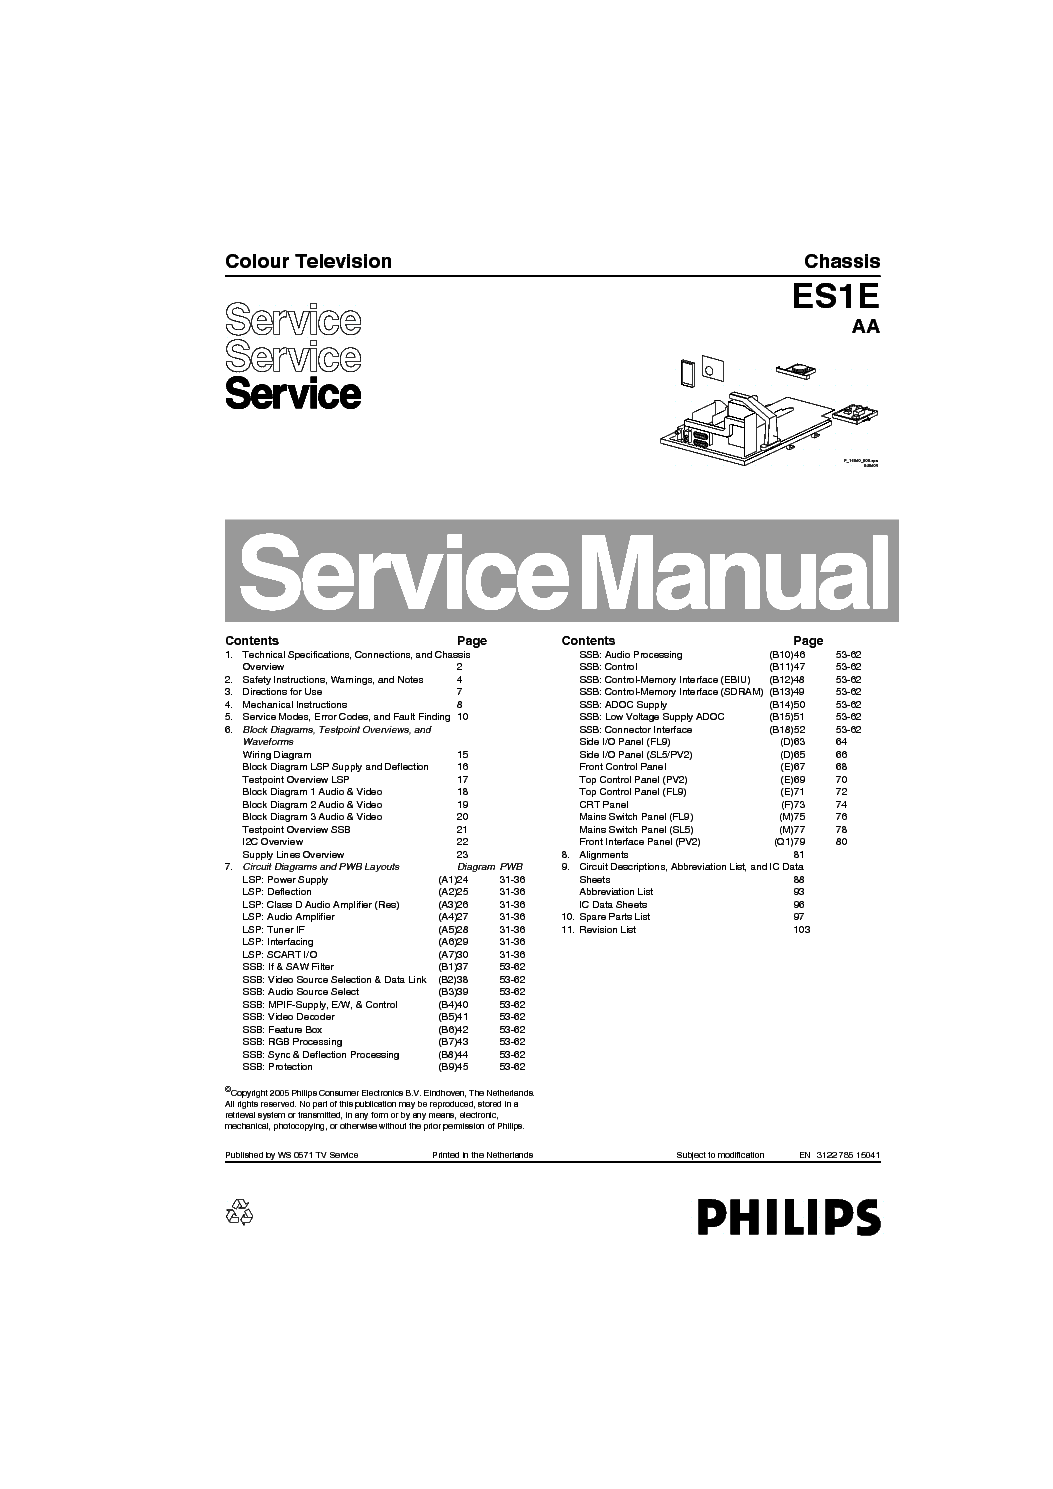 PHILIPS 29PT8520 8521 CHASSIS ES1E AA SM service manual (1st page)